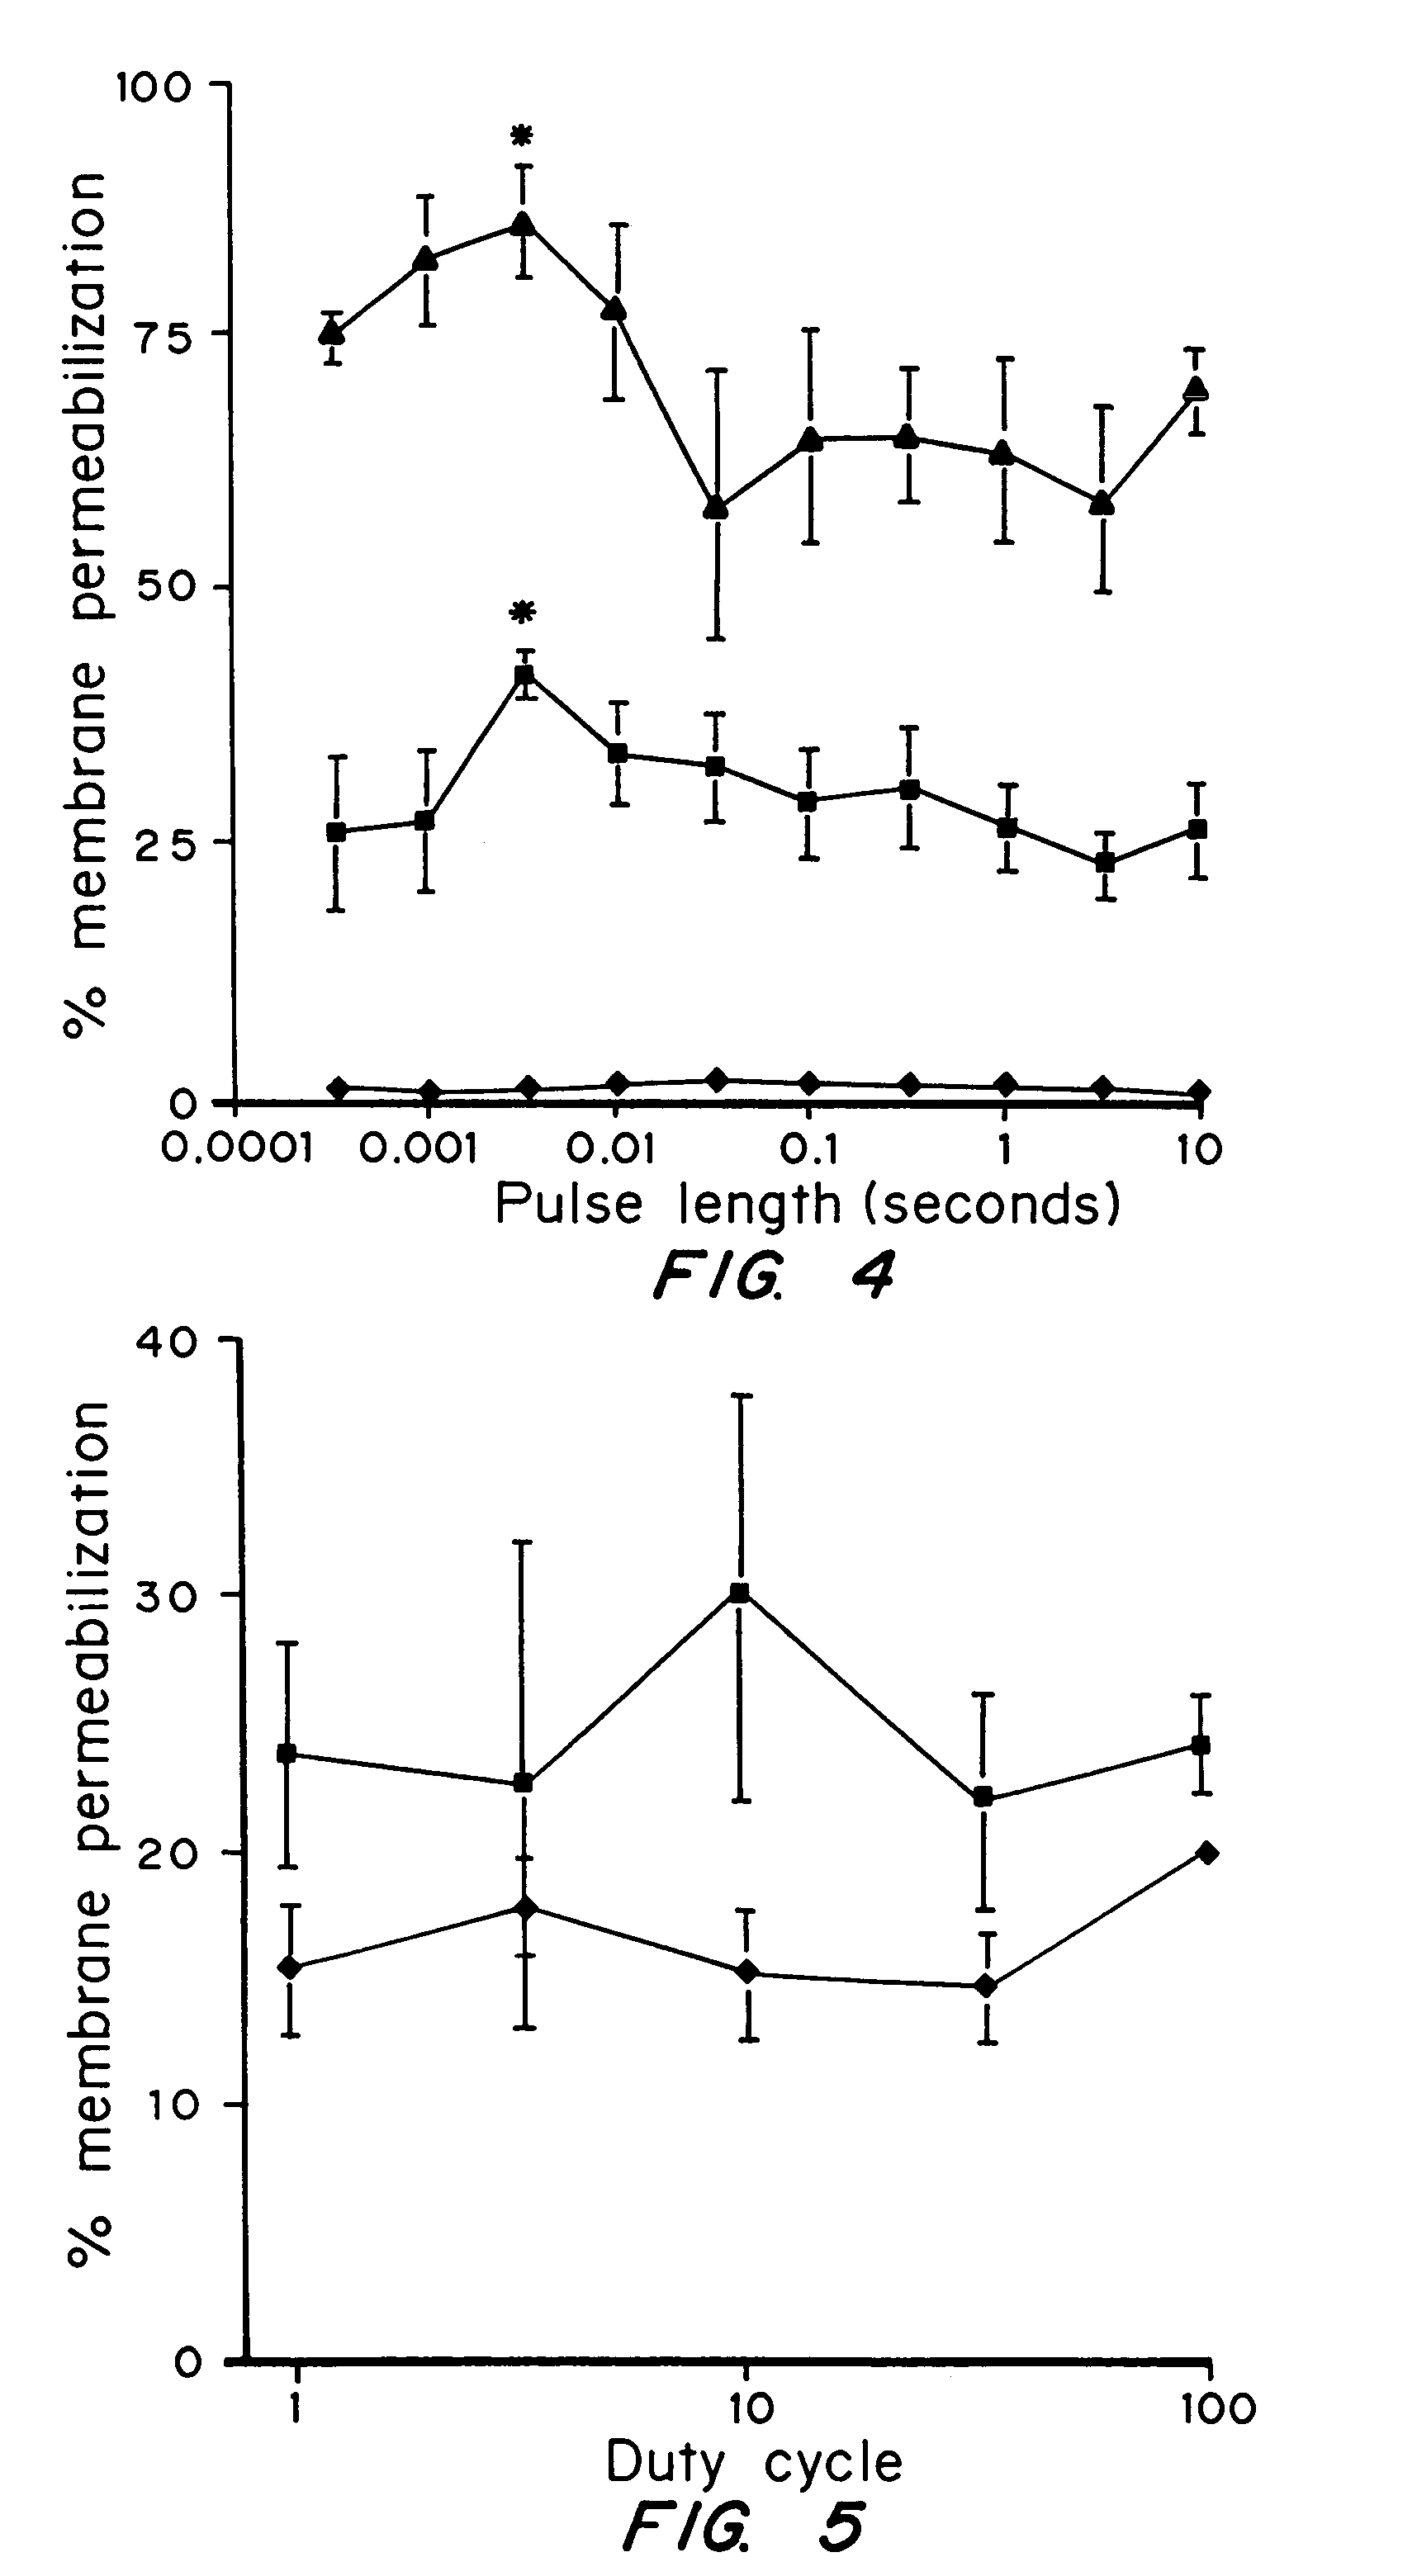 Method of applying acoustic energy effective to alter transport or cell viability